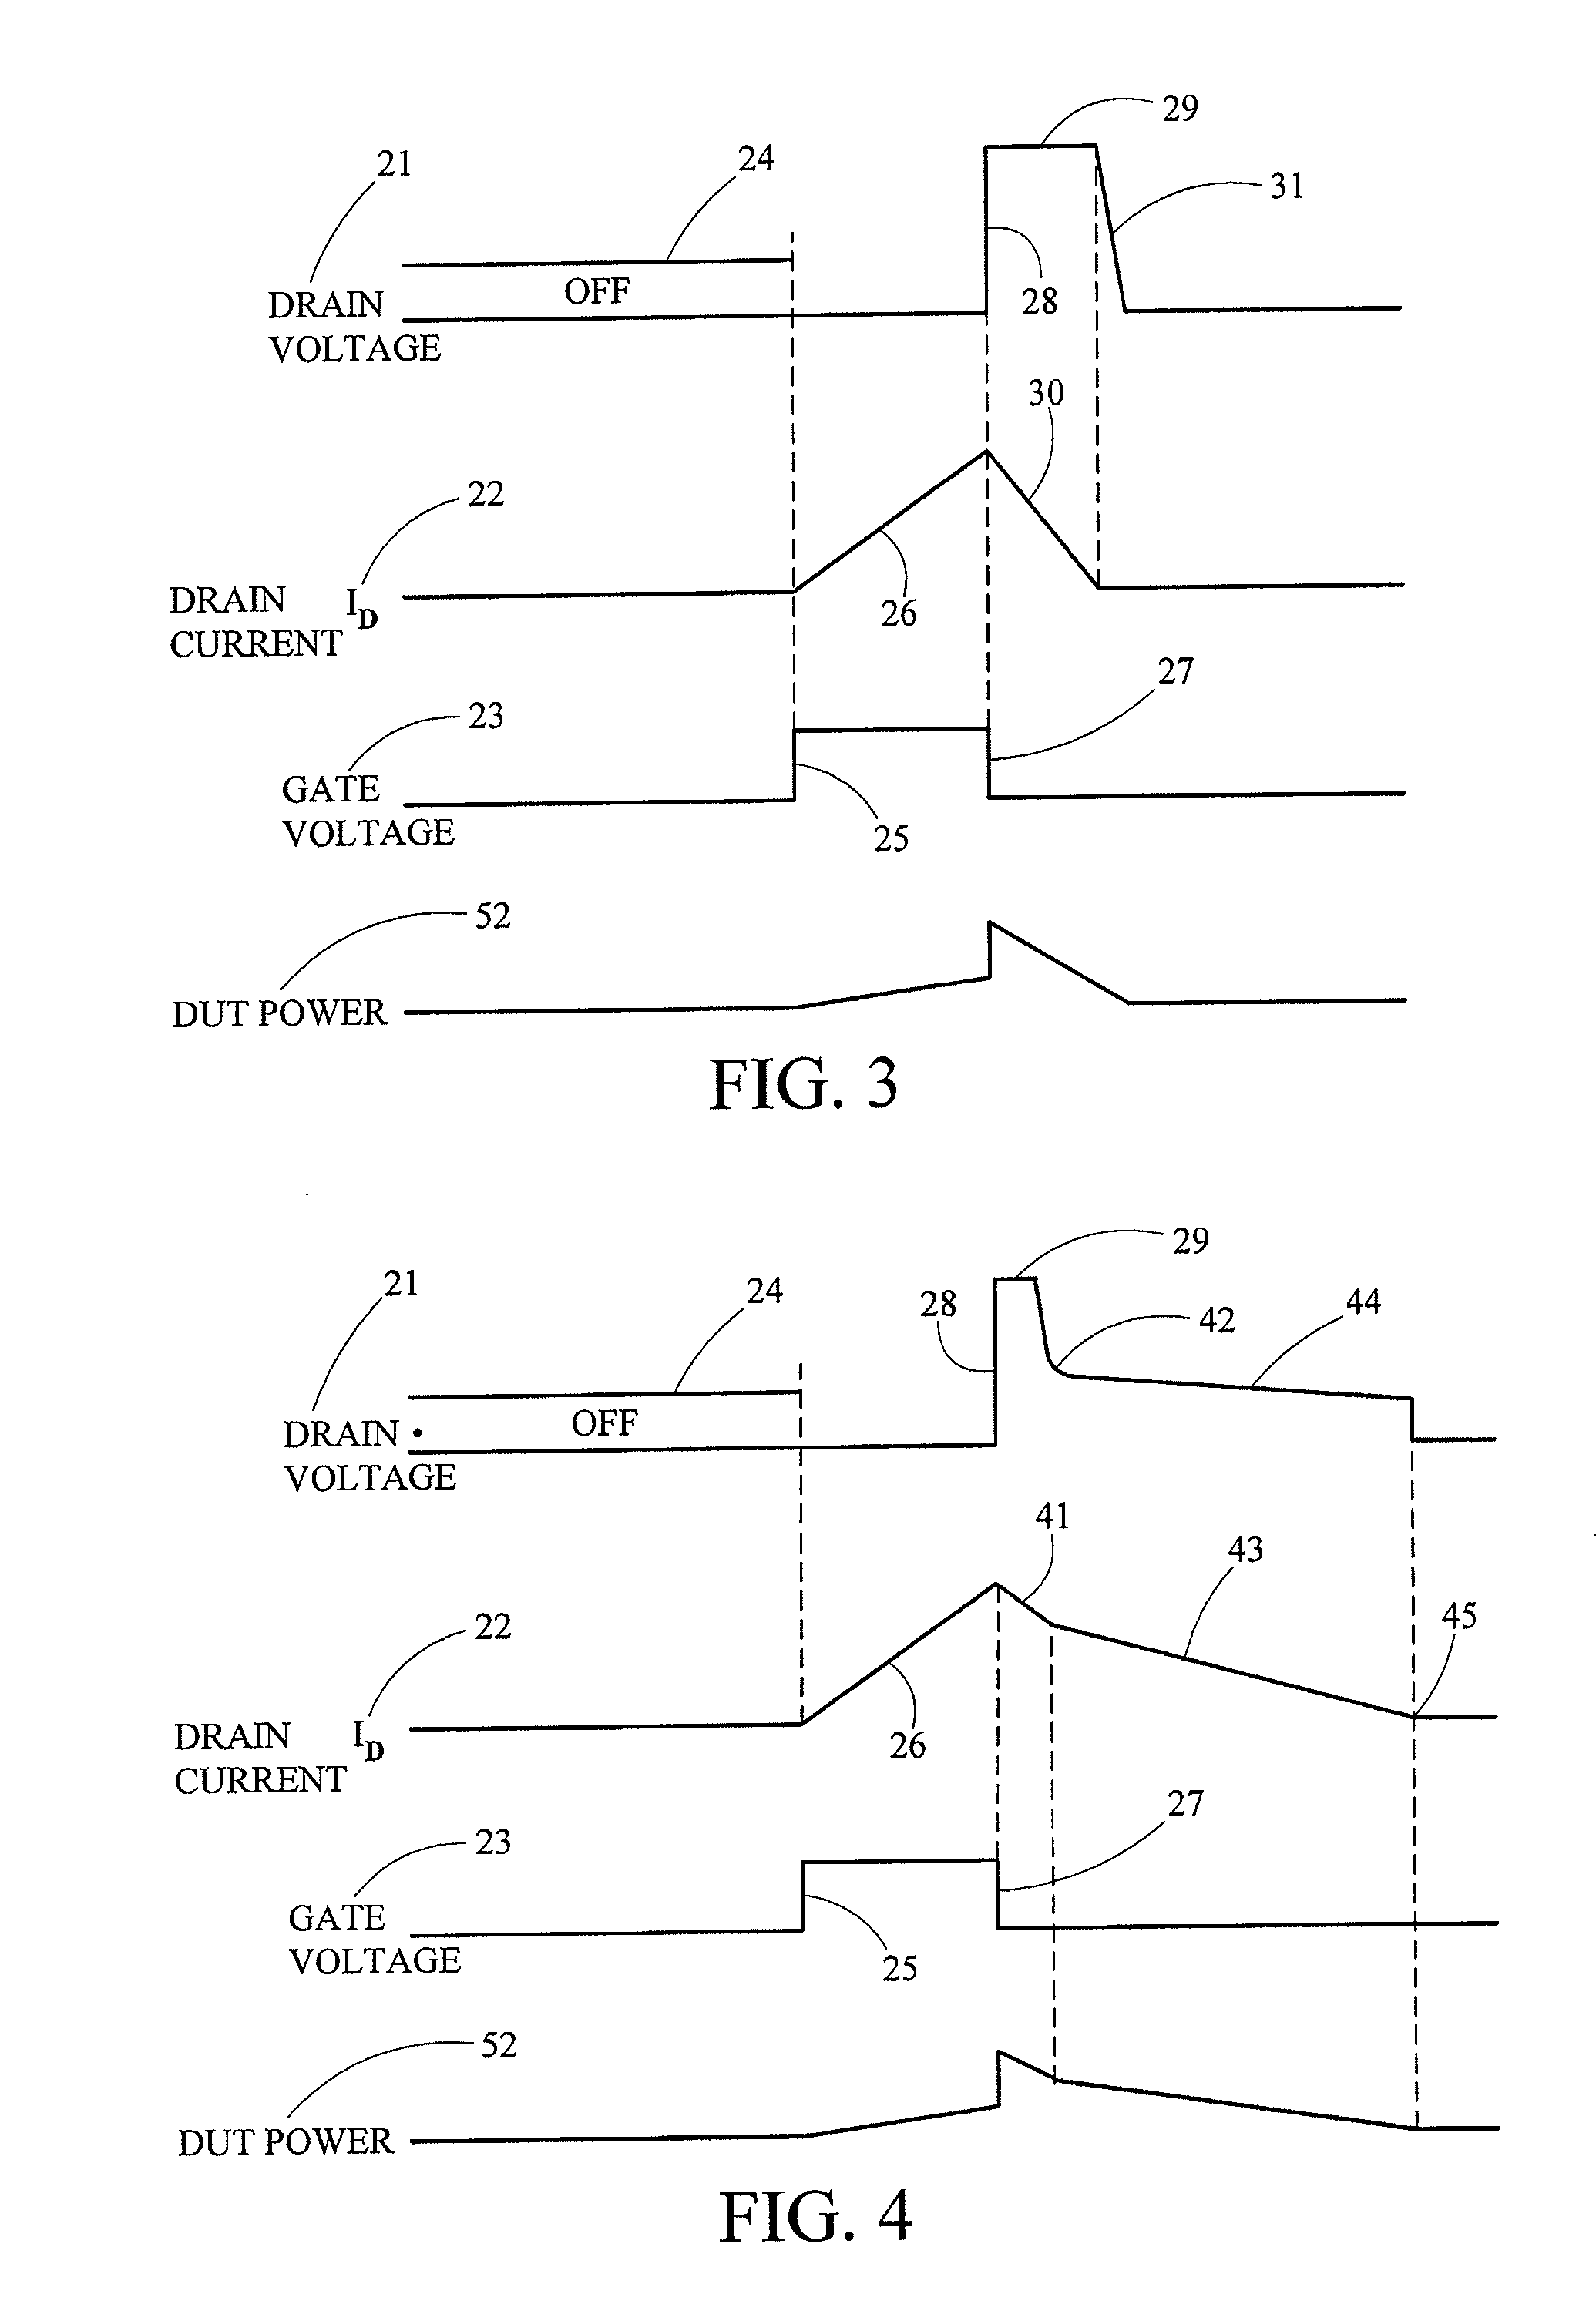 Damage reduction method and apparatus for destructive testing of power semiconductors